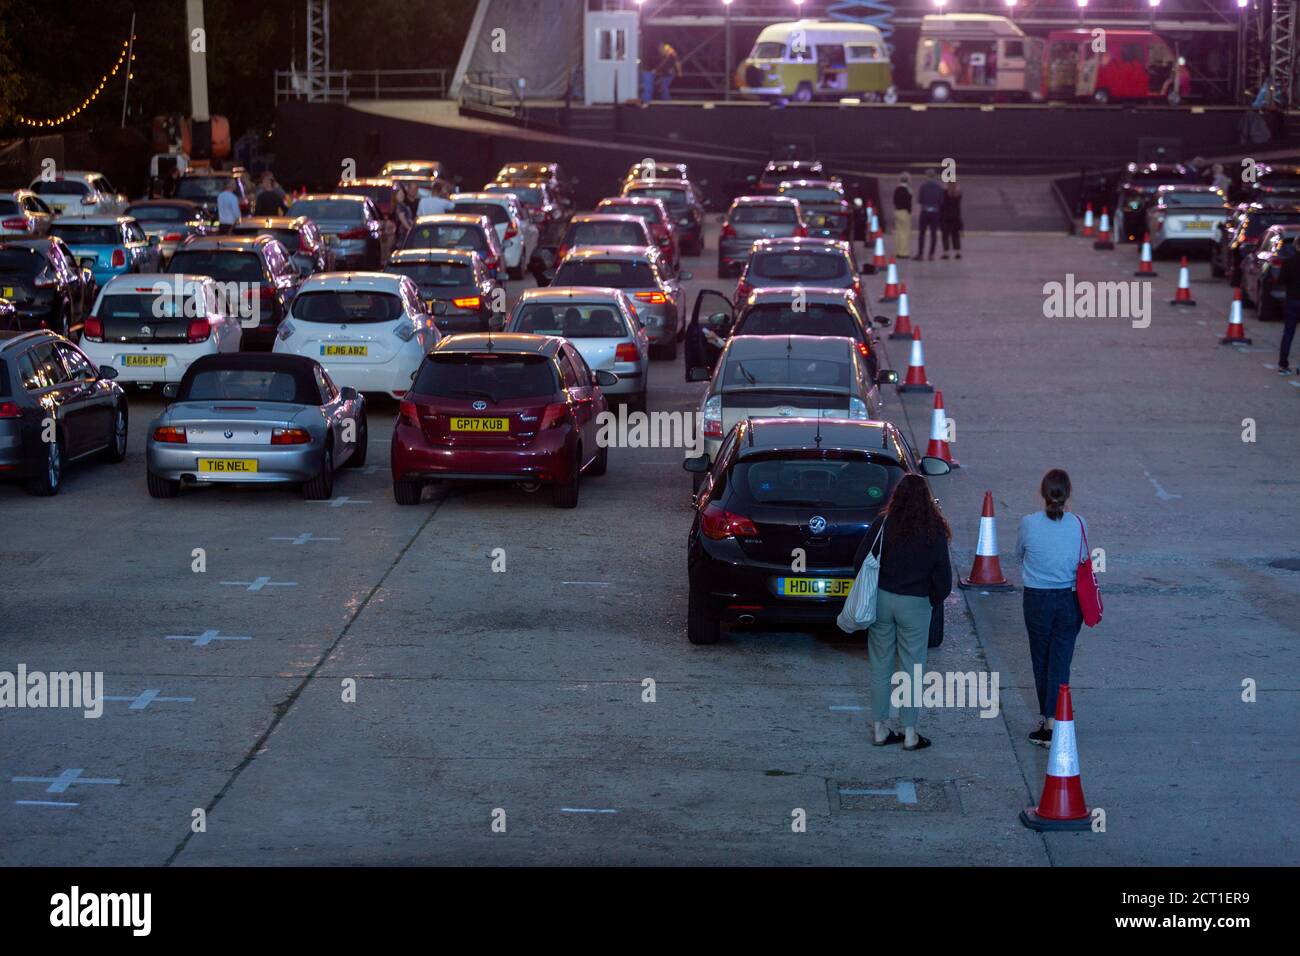 The car park fills up before the technical rehearsal of Puccini's La bohème is performed by members of  English National Opera (ENO) as a drive-in (ENO Drive and Live) at Alexandra Palace, on 18th September 2020, in London, England. This is Europe's first live drive-in opera production that audiences can safely experience from their cars and ENO's first public performance since the closure of their West End Colisseum home venue, because of the Coronavirus pandemic lockdown in March. As per the latest government advice. Each bubbled group consists of; 34 members of the ENO Orchestra, 20 ENO Cho Stock Photo